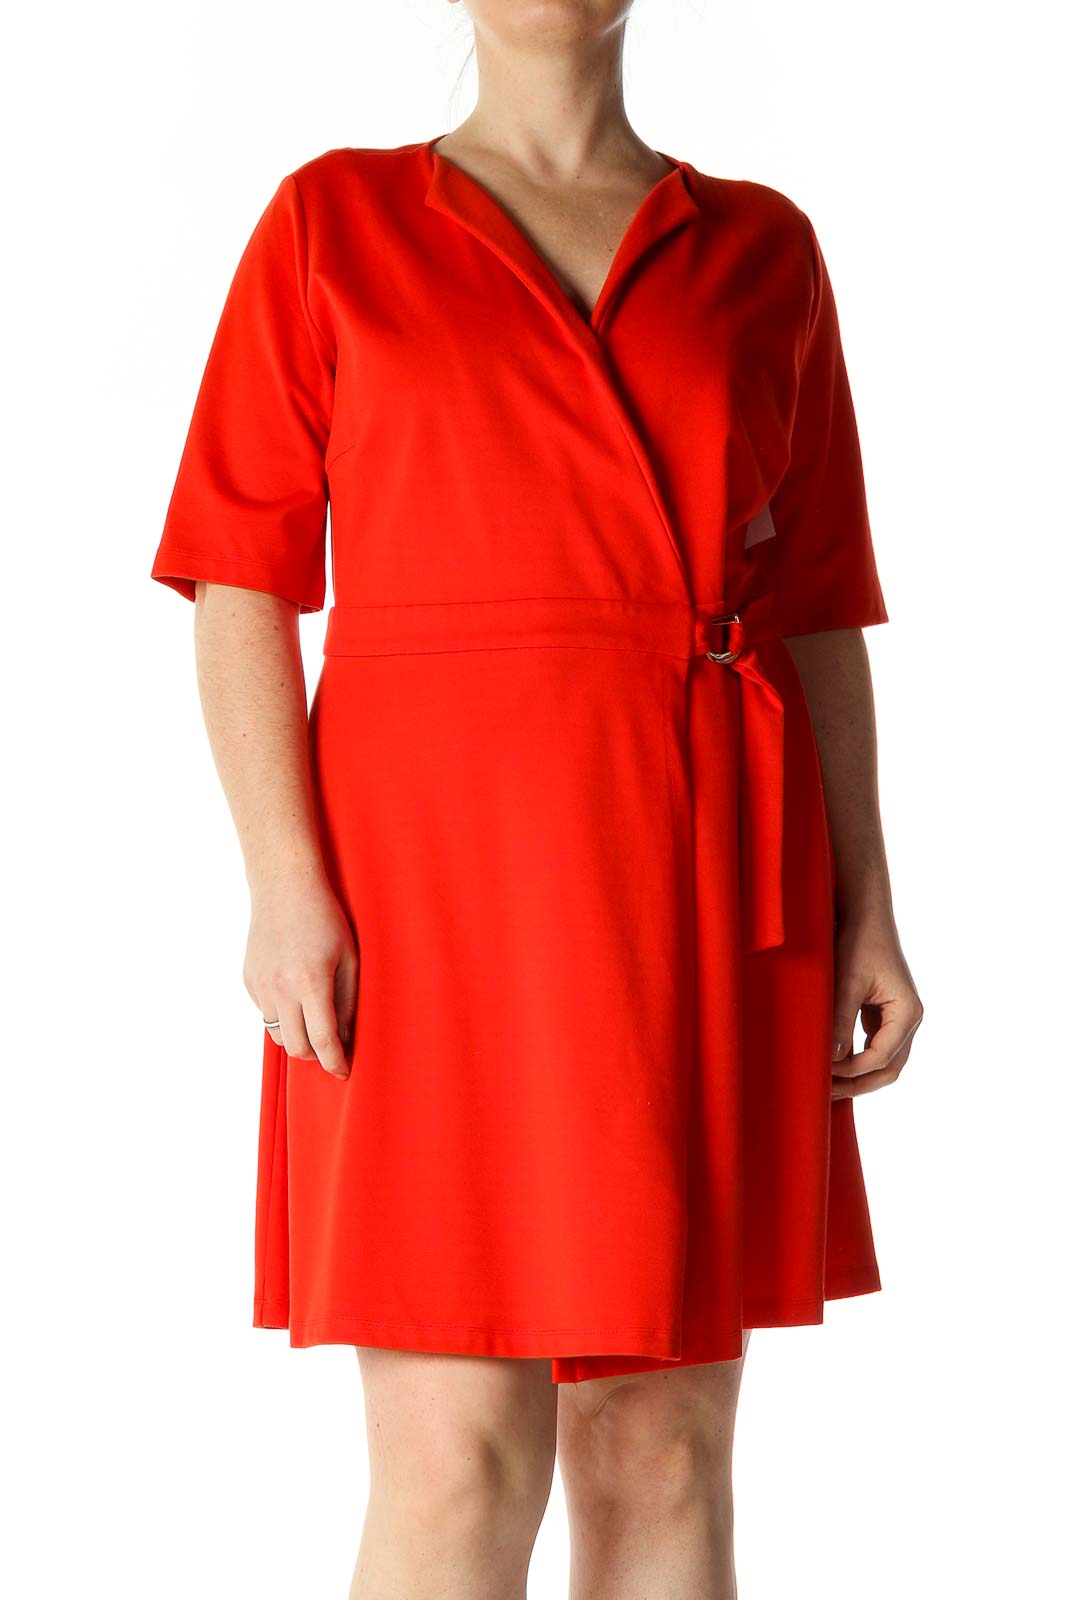 Red Solid Casual A-Line Dress Front